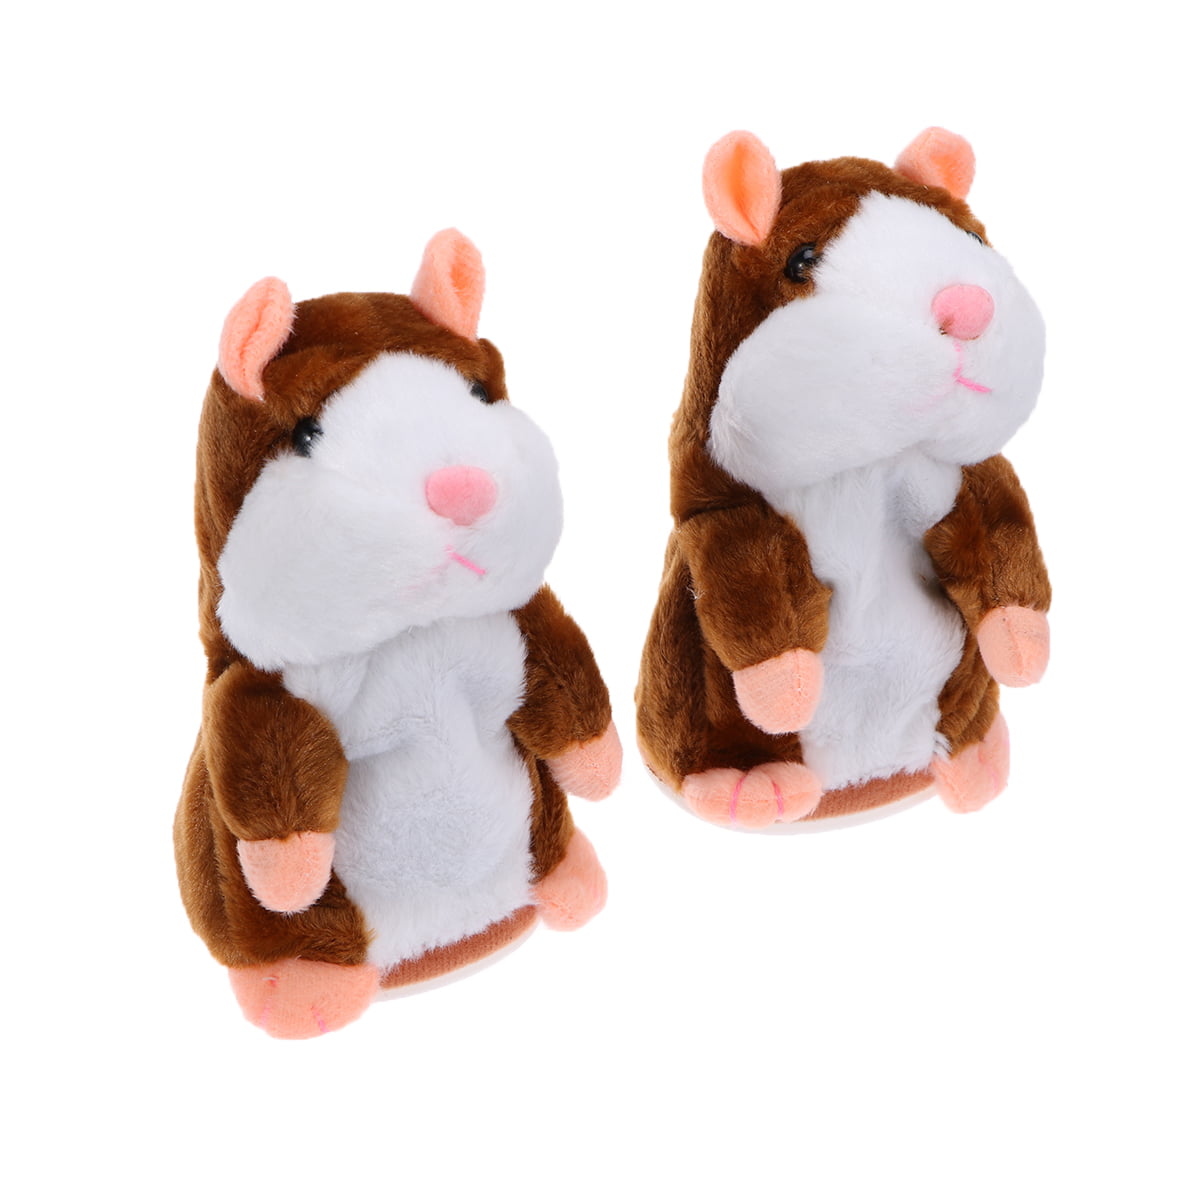 Adorable Toy Mimicry Pet Speak Talking Record Hamster Mouse Plush Kids Toy MA 